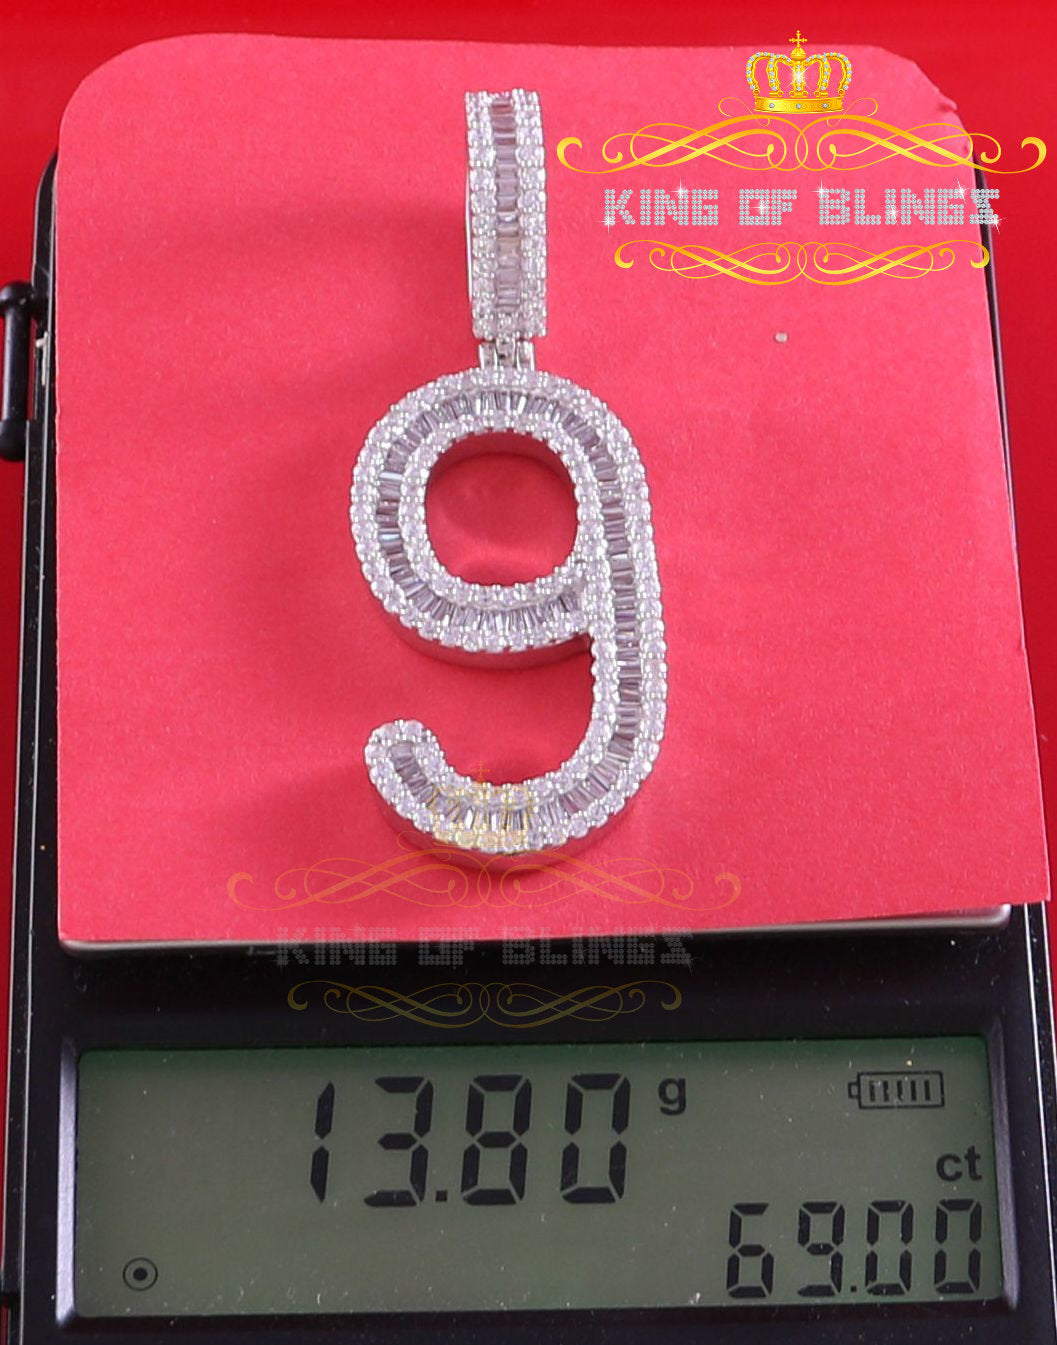 White Sterling Silver Baguette Numberical NINE Pendant 4.86ct Cubic Zirconia KING OF BLINGS